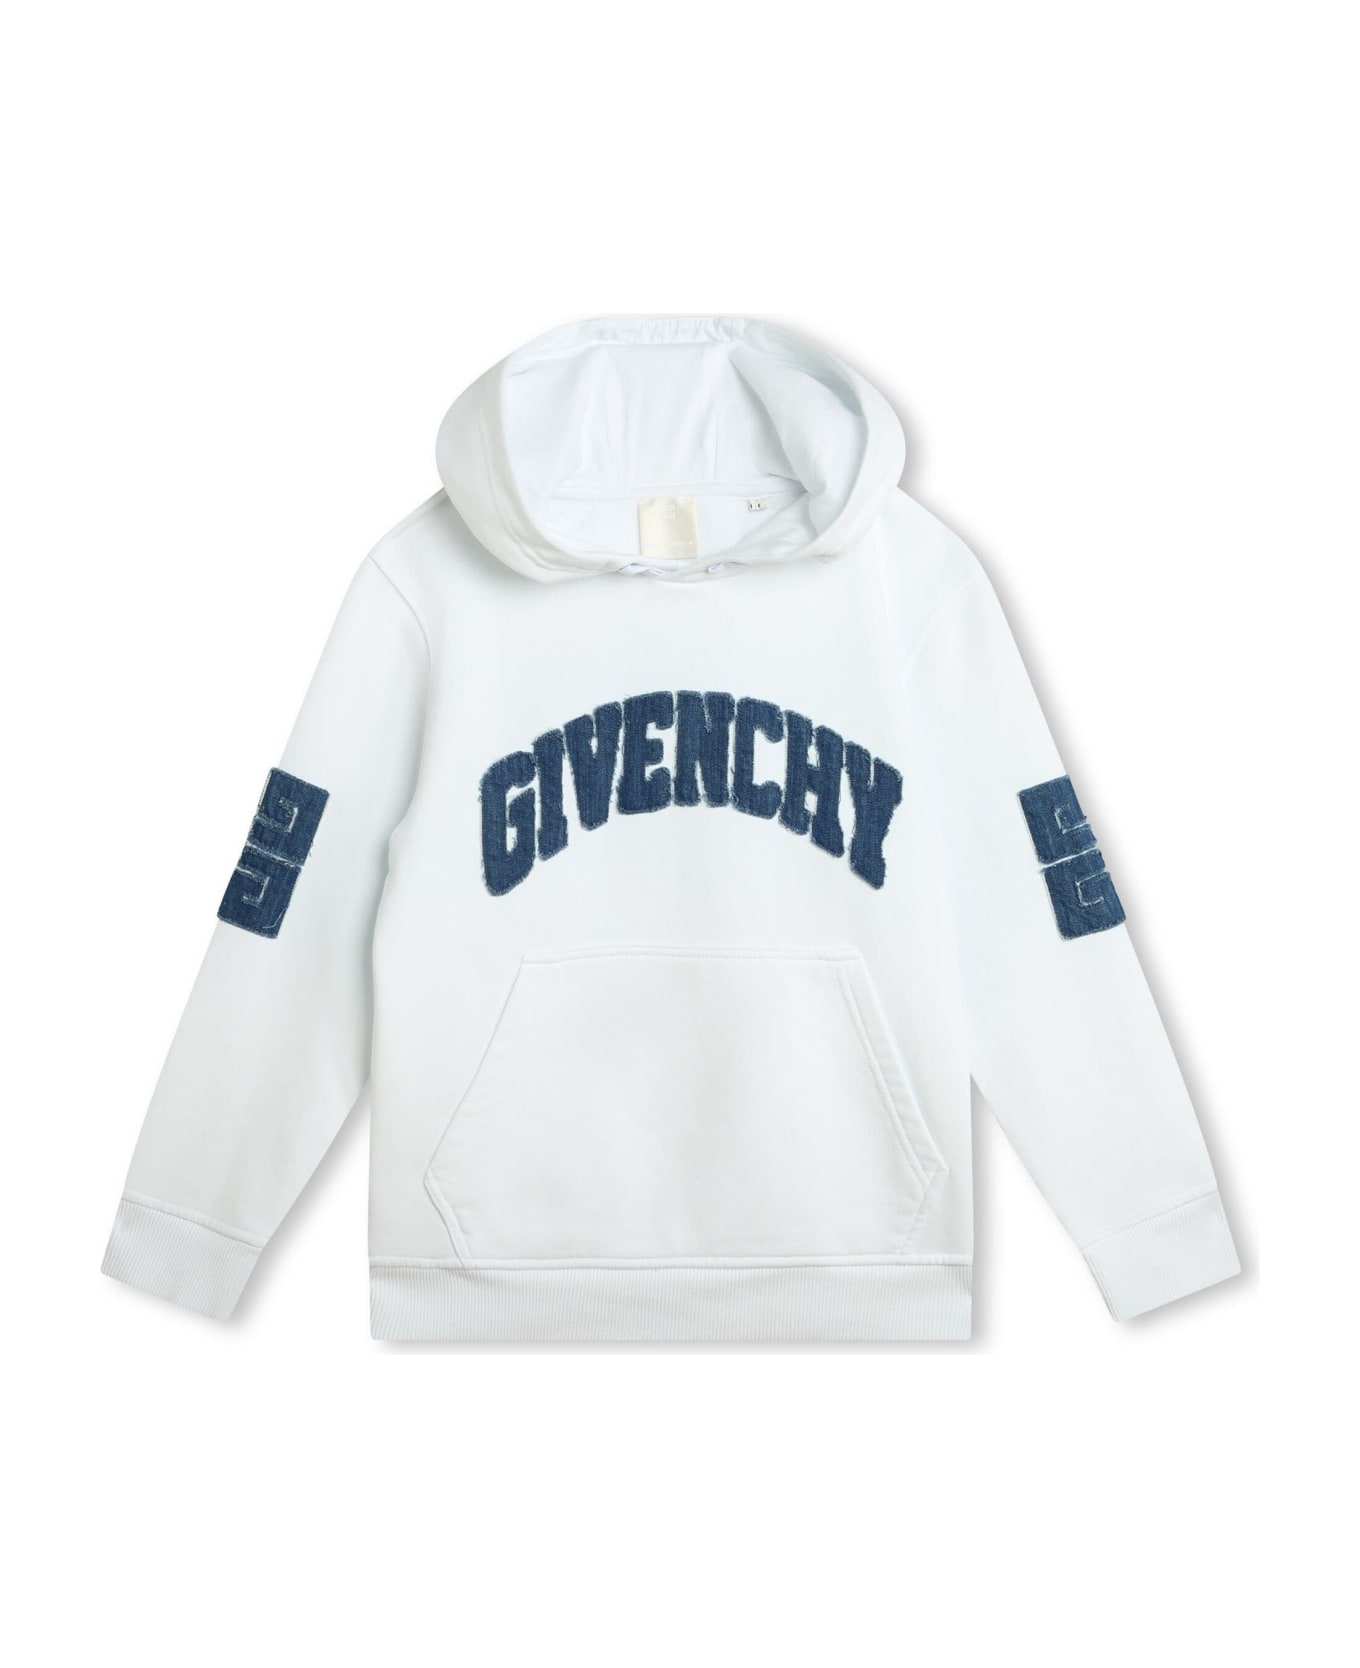 Givenchy White Hoodie With Denim Givenchy 4g Logo - White